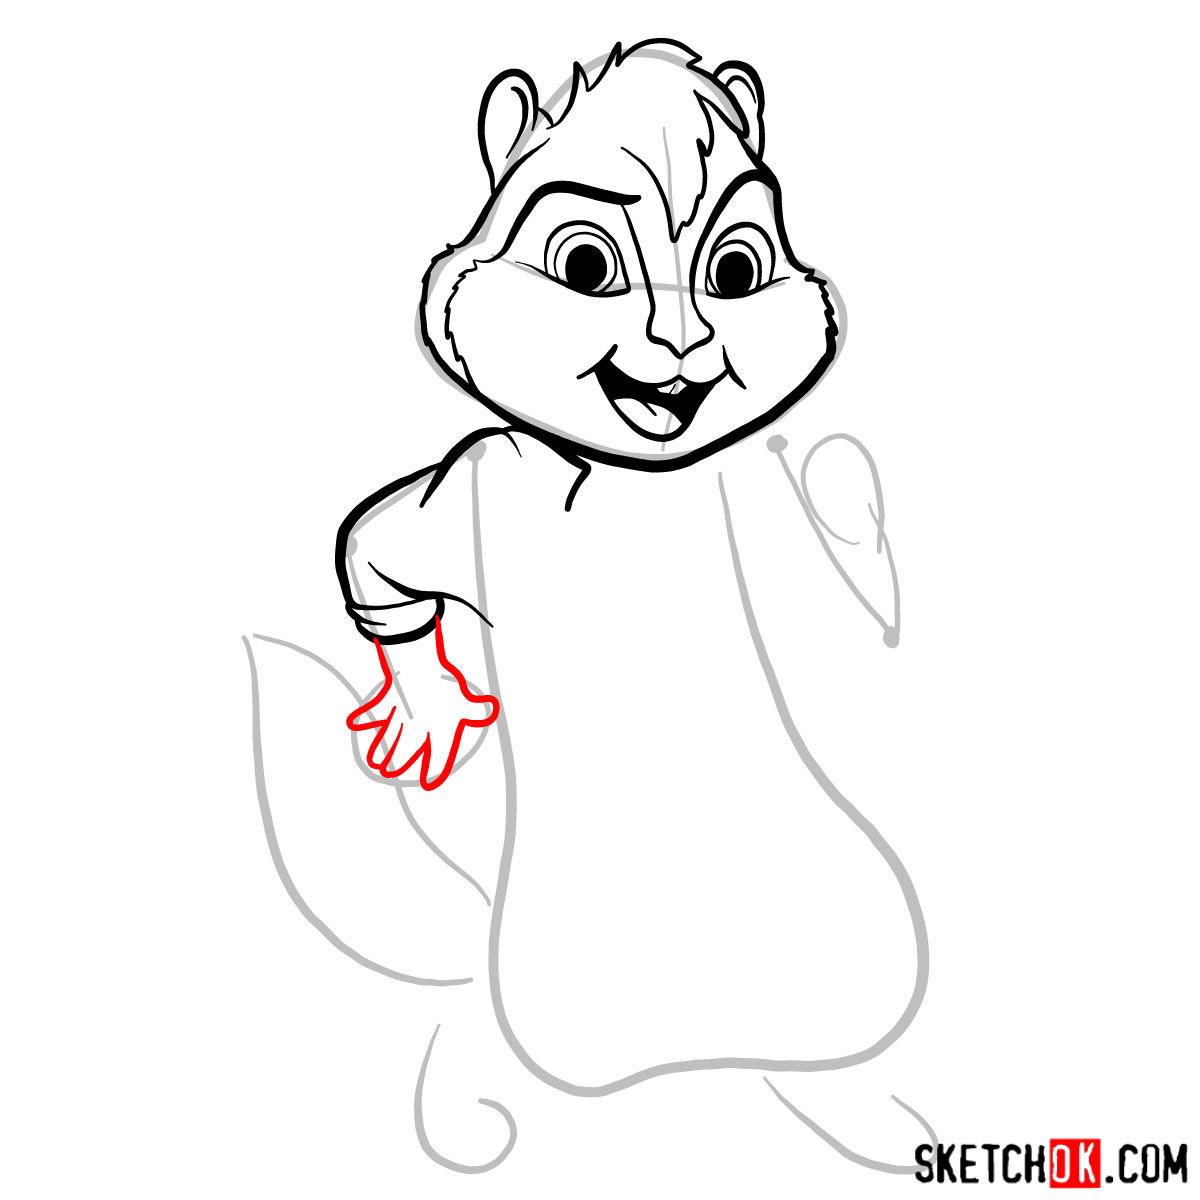 How to draw Alvin from Alvin and the Chipmunks - step 06